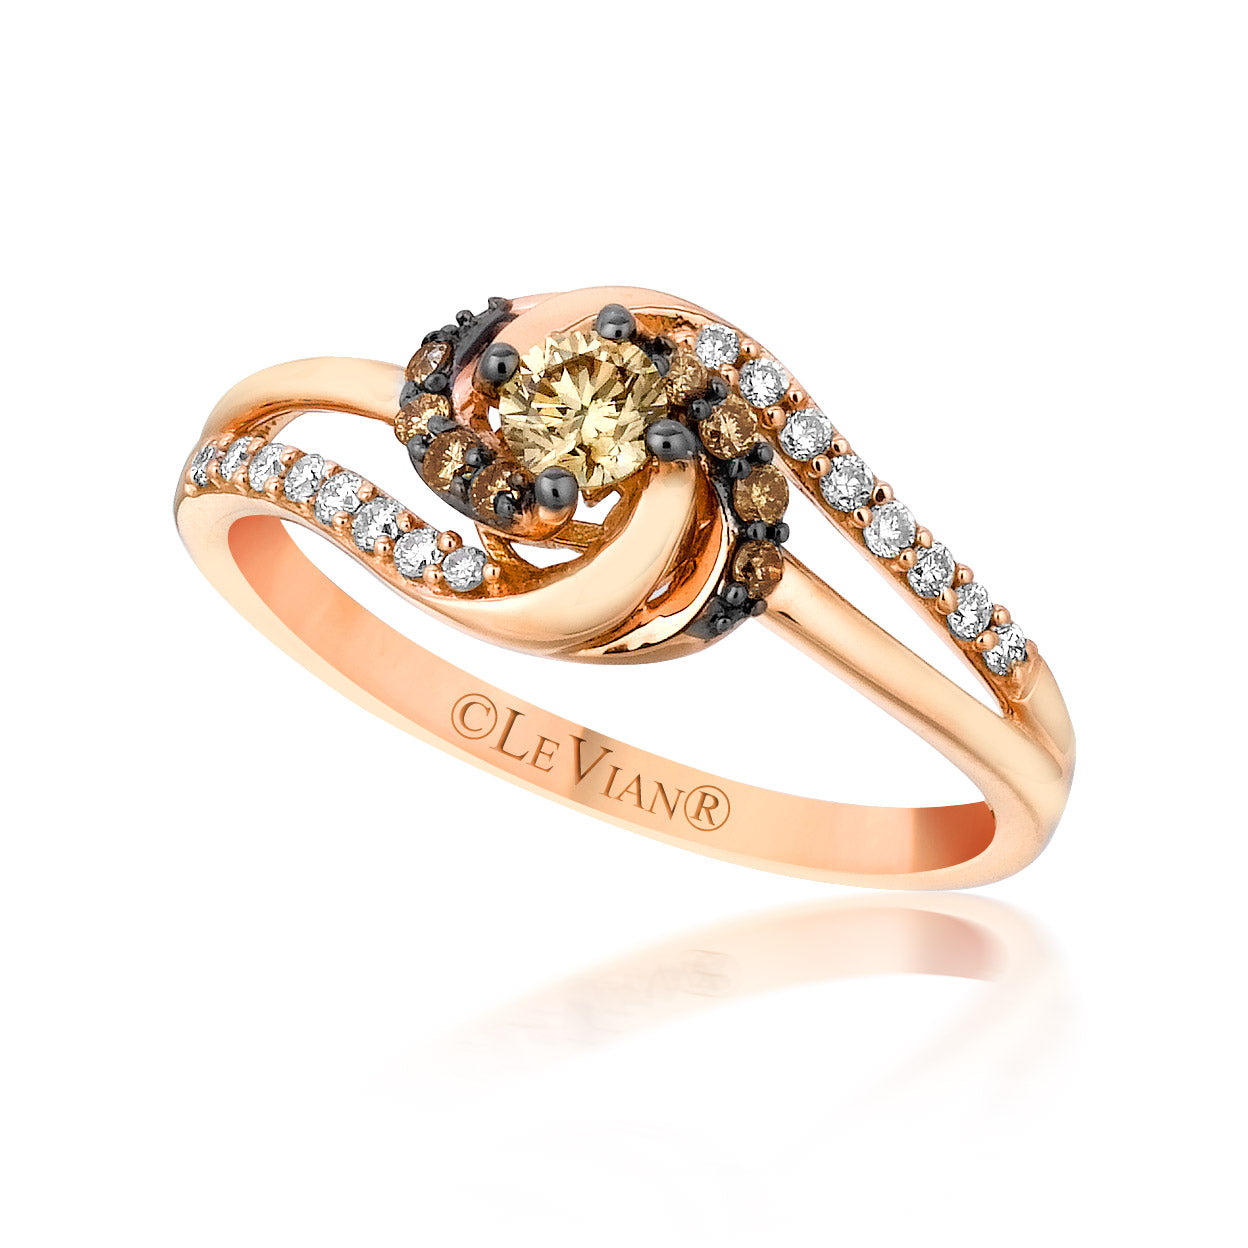 14Kt Strawberry Gold And Diamond Ring, 0.39Cts Total Weight